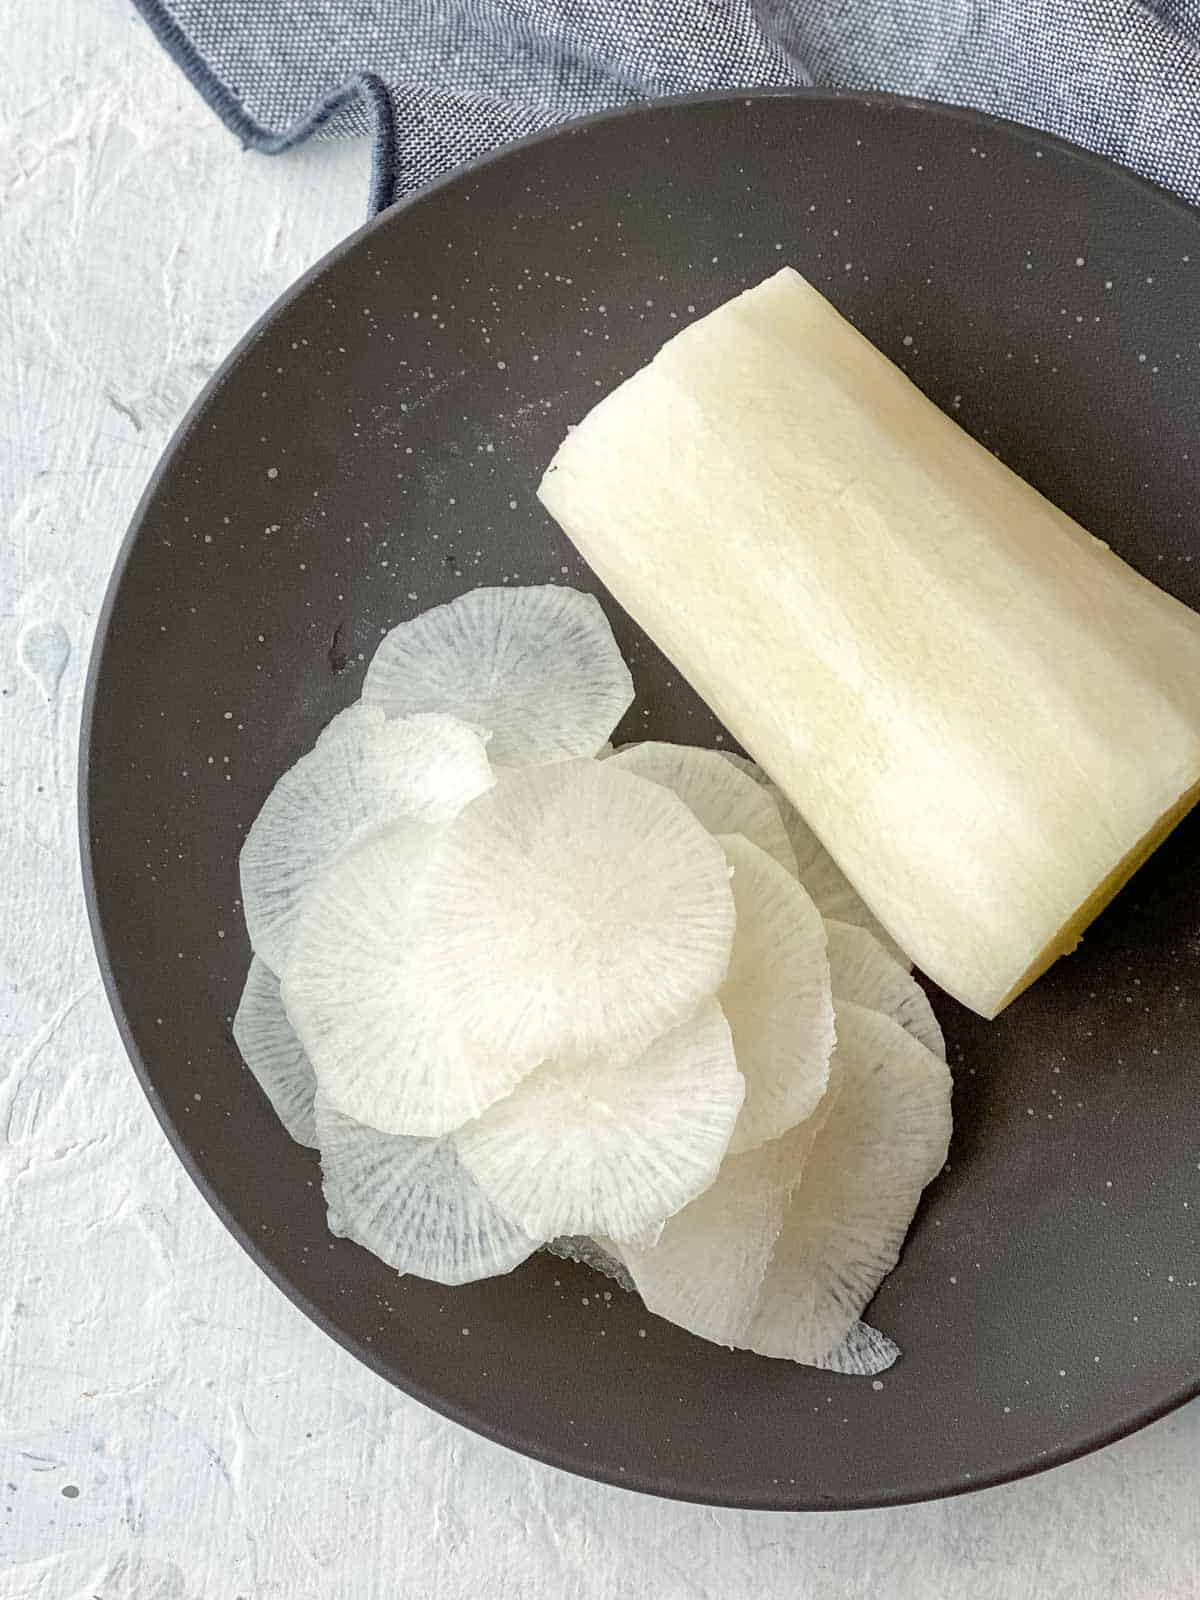 Shaved daikon on a brown plate